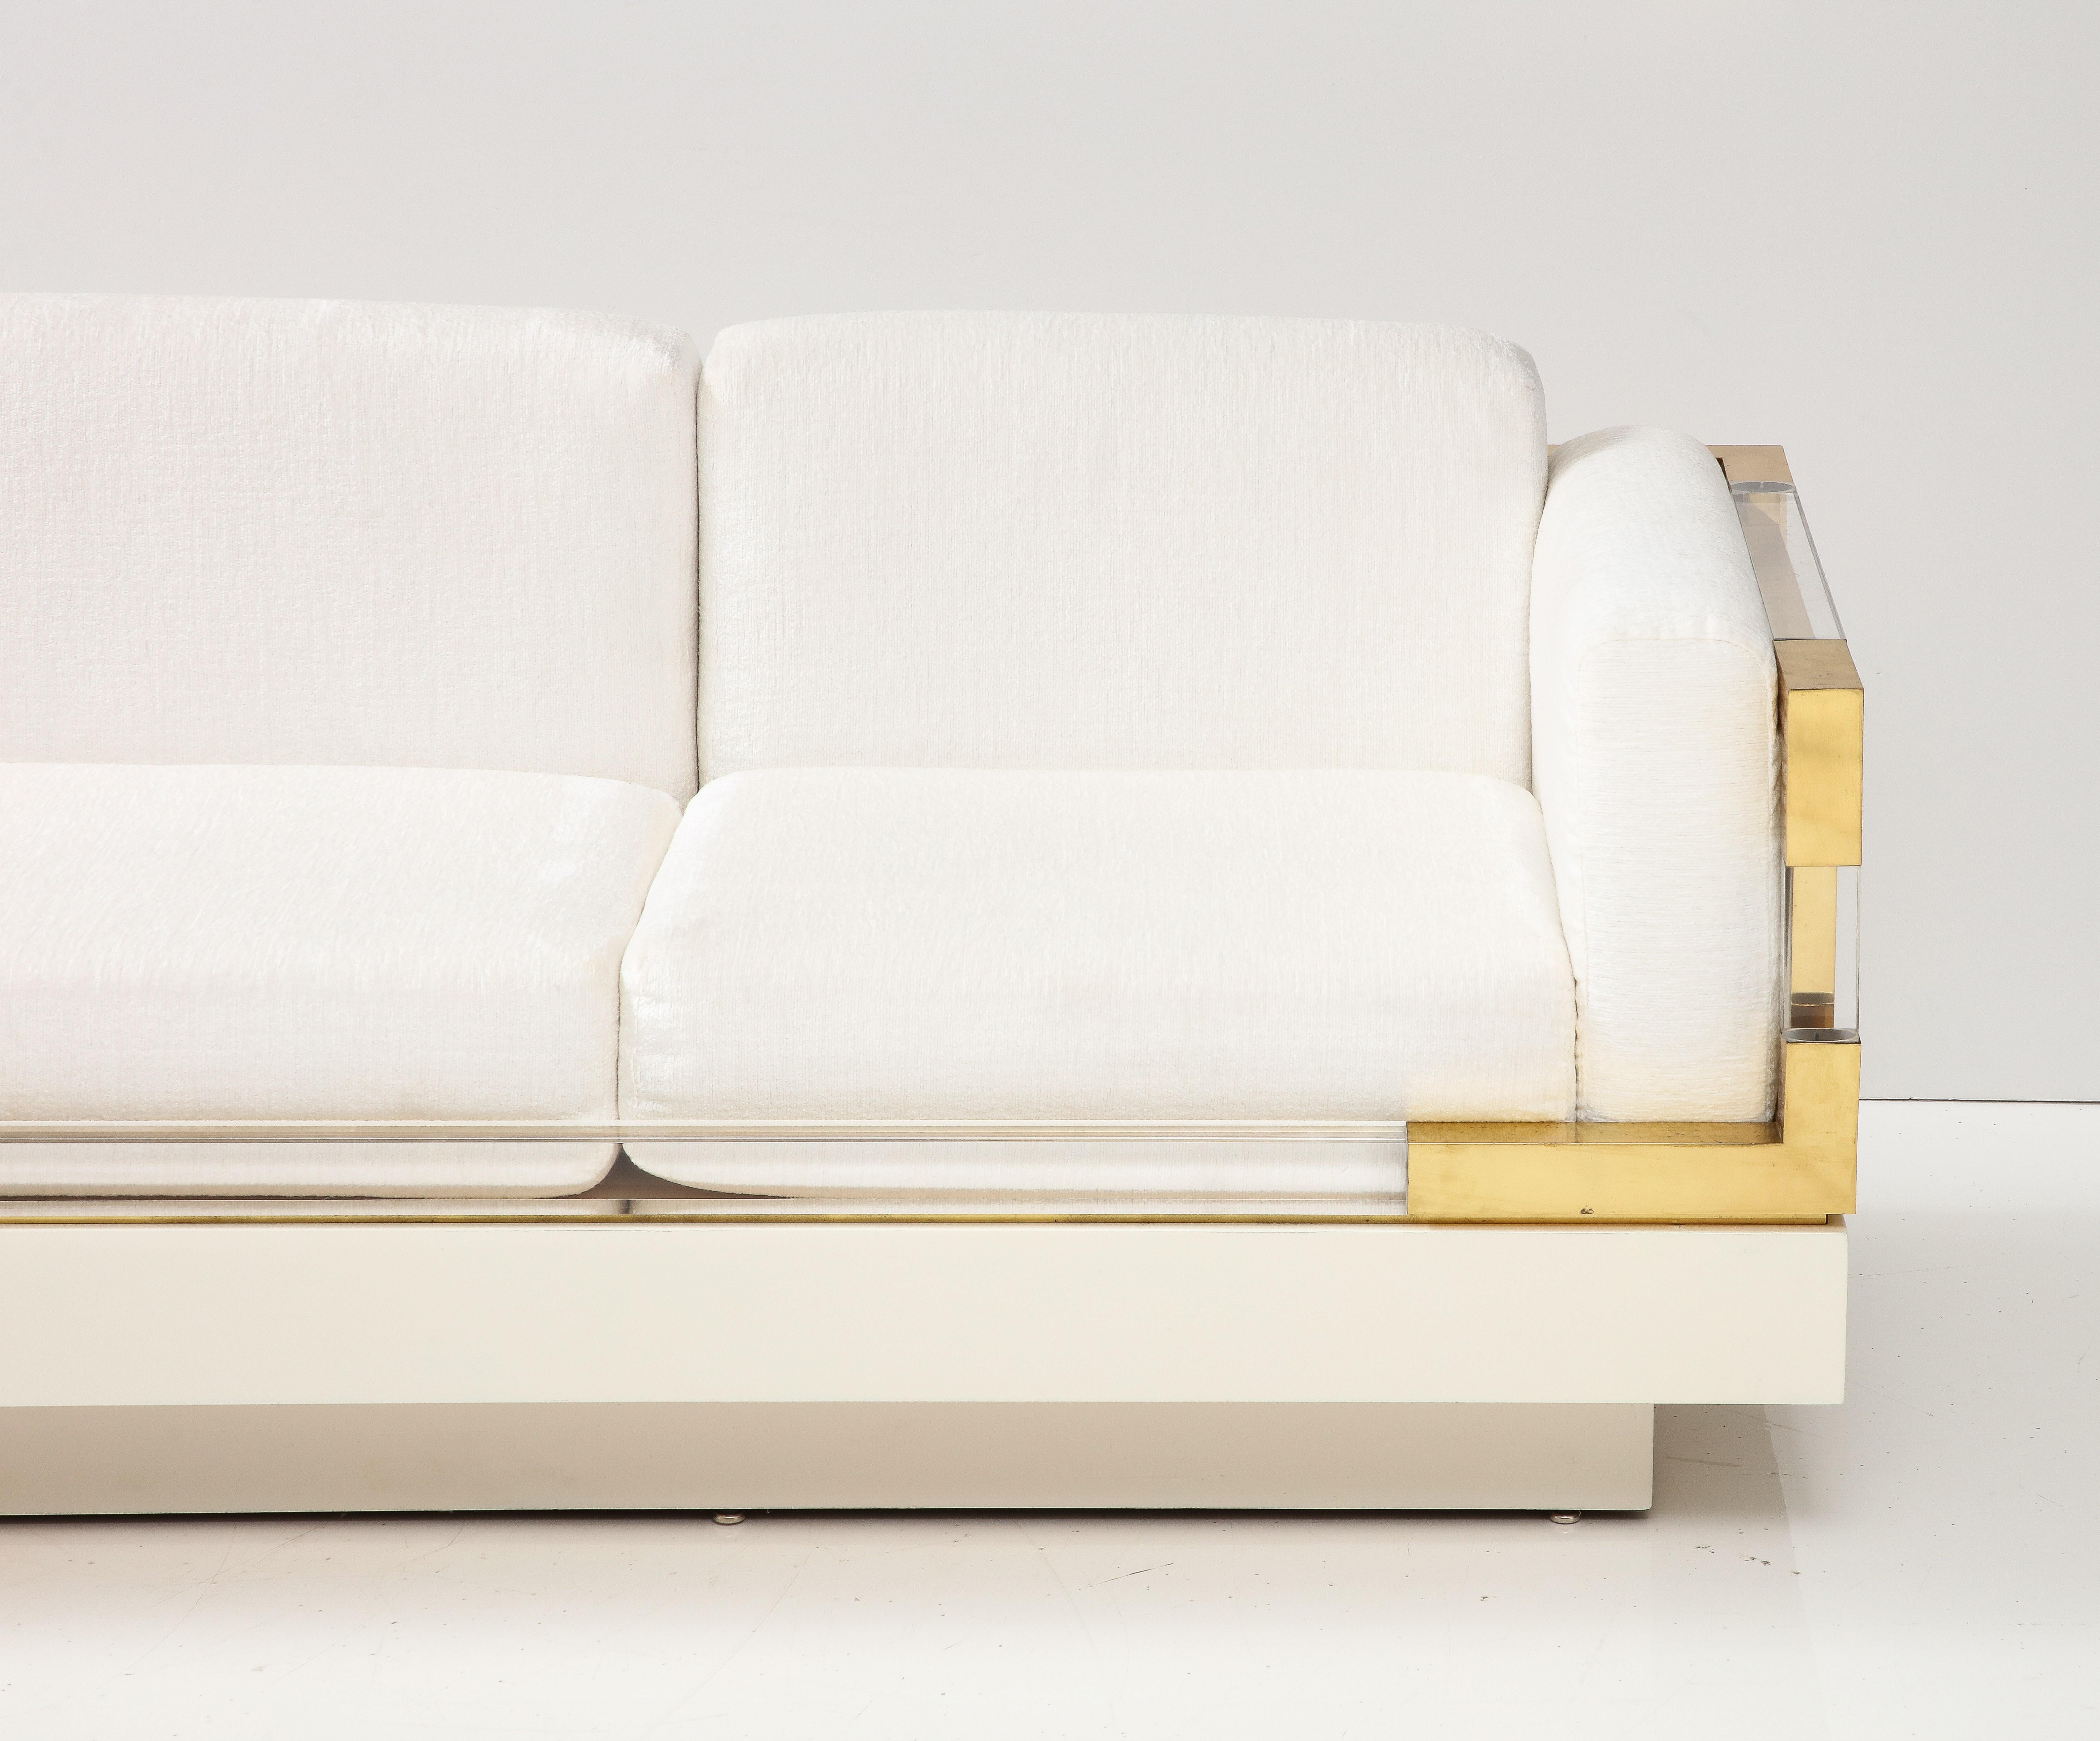 Rare Italian 1980's Lucite and Brass Sofa by Fabian For Sale 2